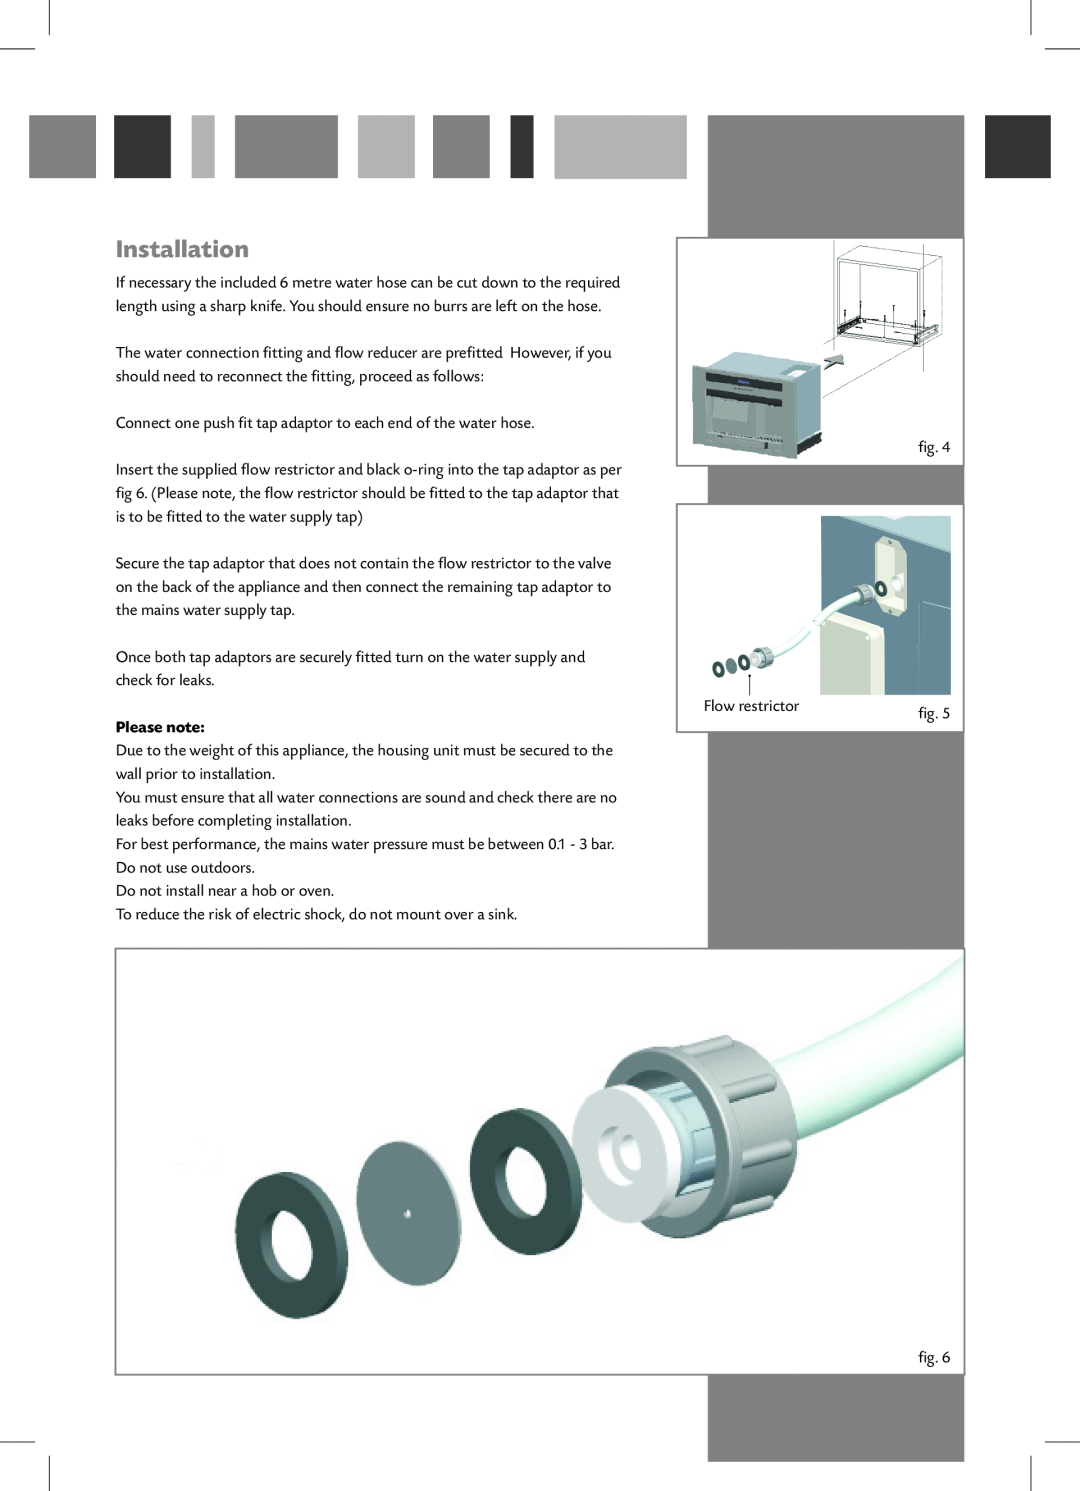 CDA FWV460 Installation, Connect one push fit tap adaptor to each end of the water hose, Please note, Flow restrictor 